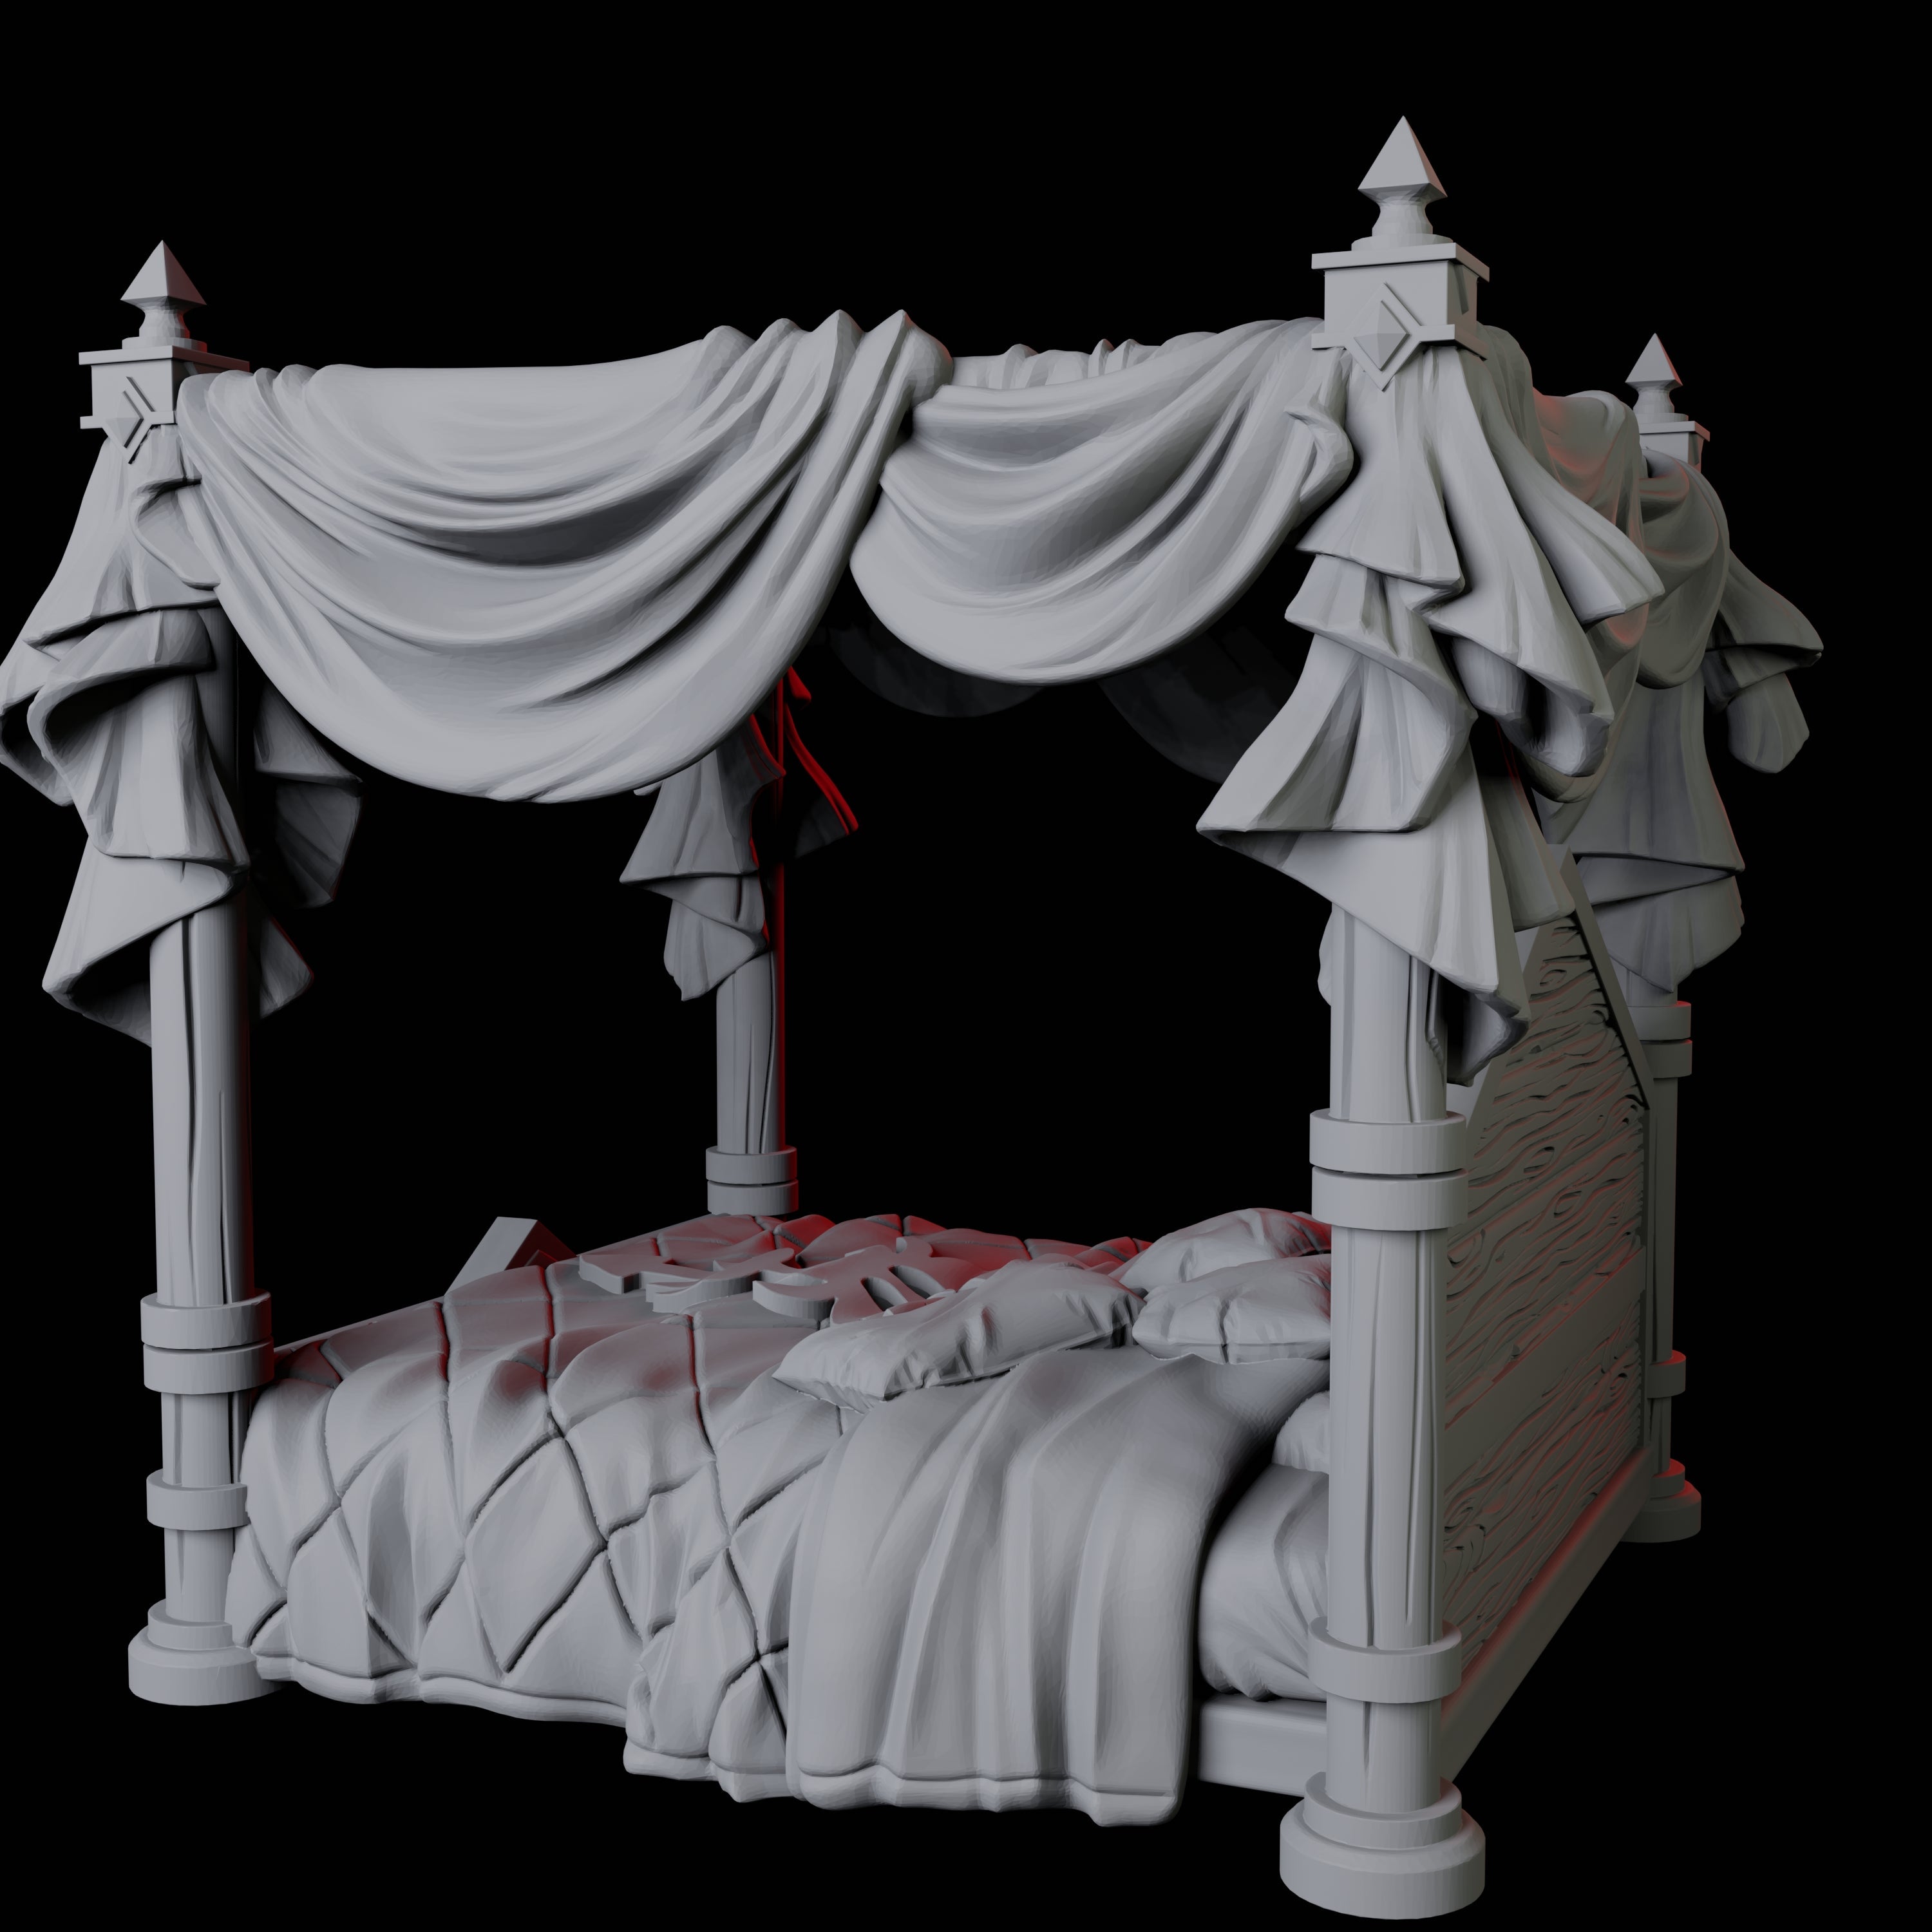 Four Poster Bed Miniature for Dungeons and Dragons, Pathfinder or other TTRPGs